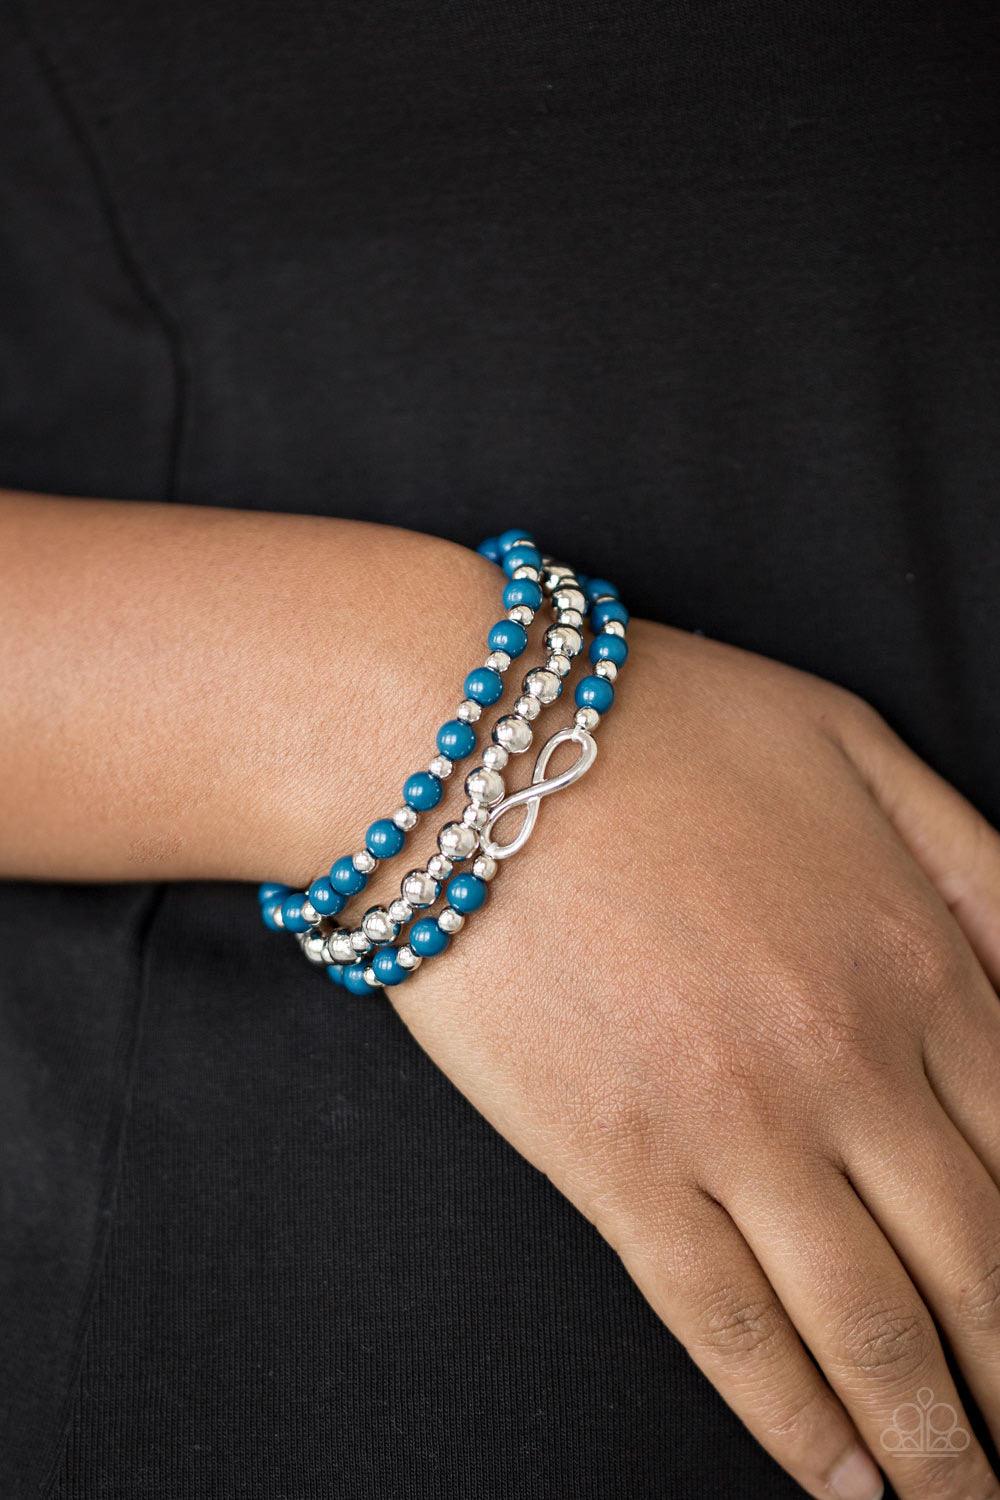 Paparazzi Accessories Immeasurably Infinite -Blue Refreshing blue and shiny silver beads are threaded along stretchy bands, creating colorful layers around the wrist. A dainty silver infinity charm adorns one strand for a whimsical finish. Sold as one set